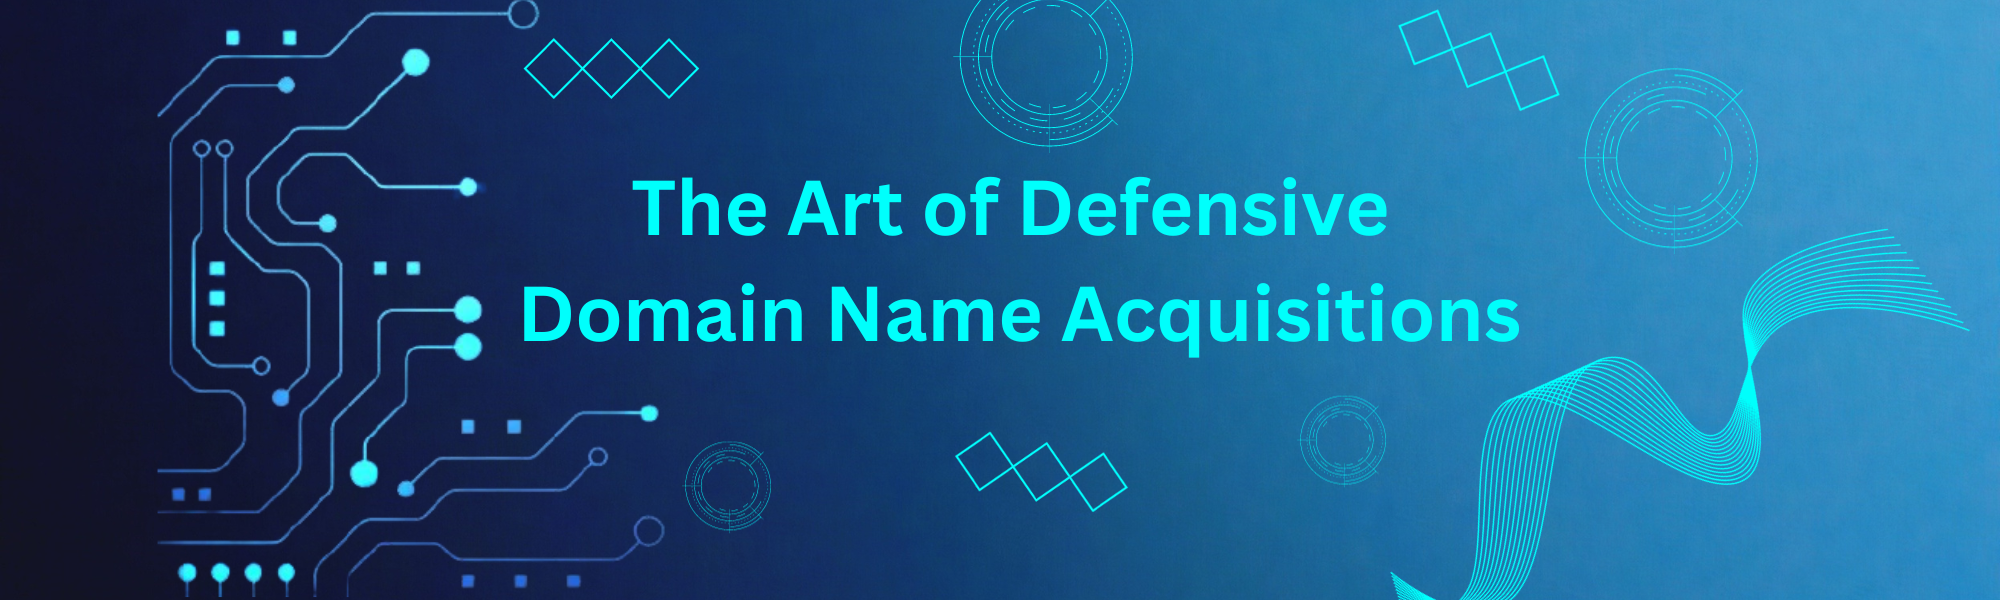 Art of Defensive Domain Name Acquisitions: Safeguarding Your Digital Identity